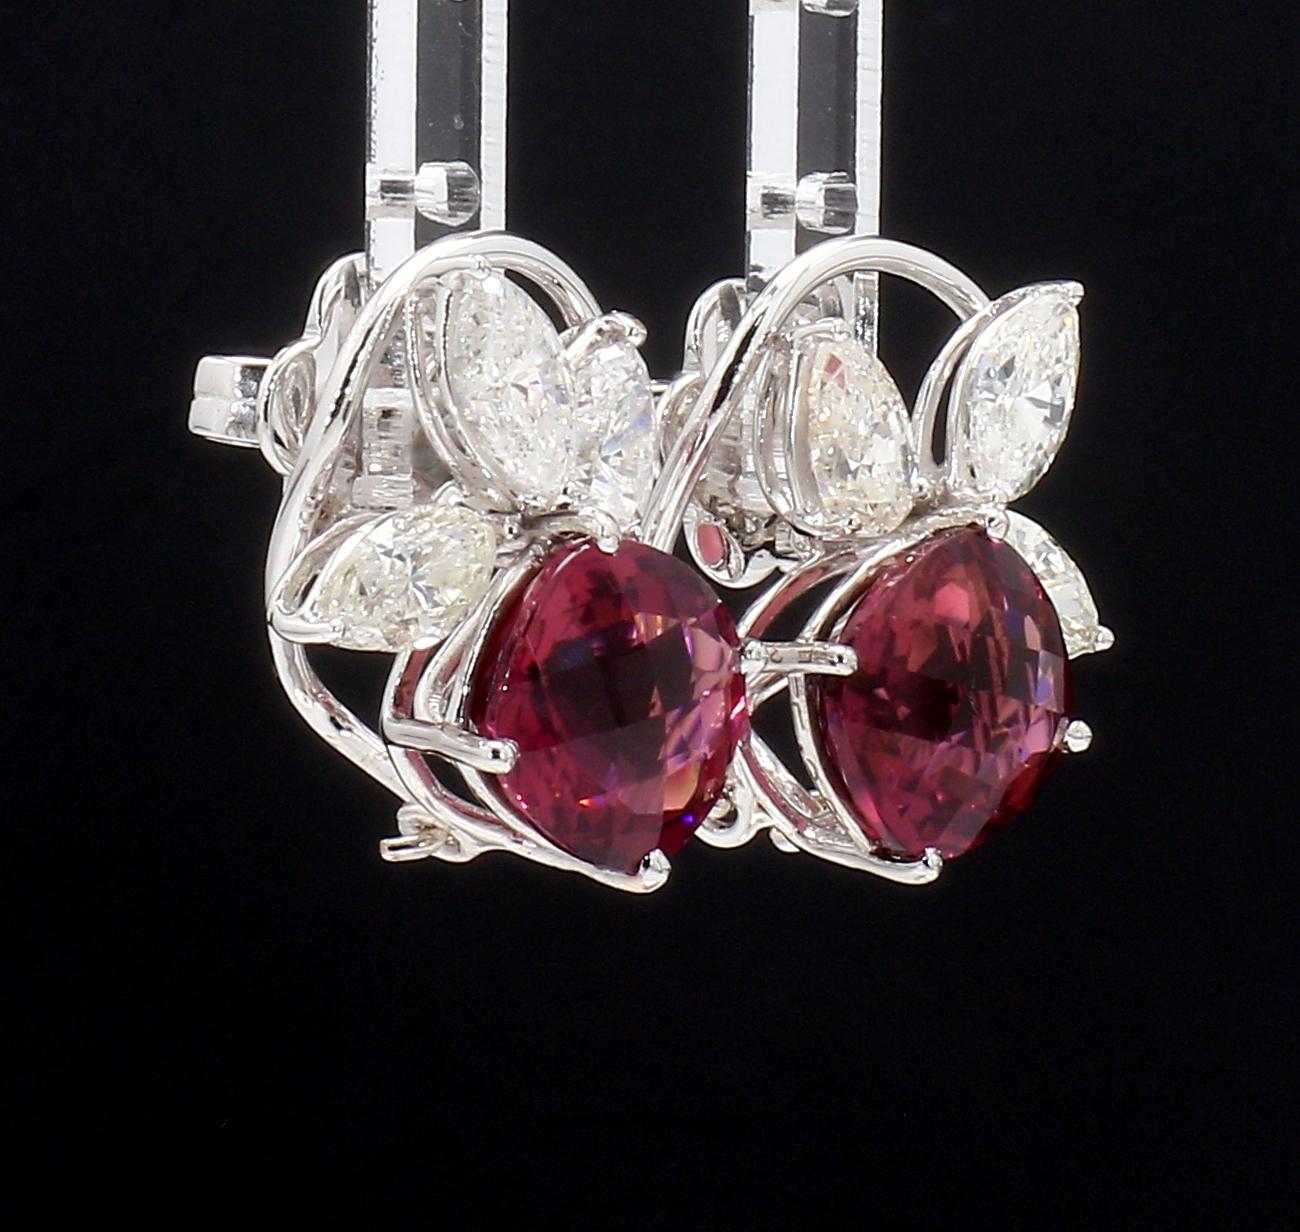 3Ct Marquise Diamonds with Pink Tourmaline Earrings in White Gold Hallmarked 1